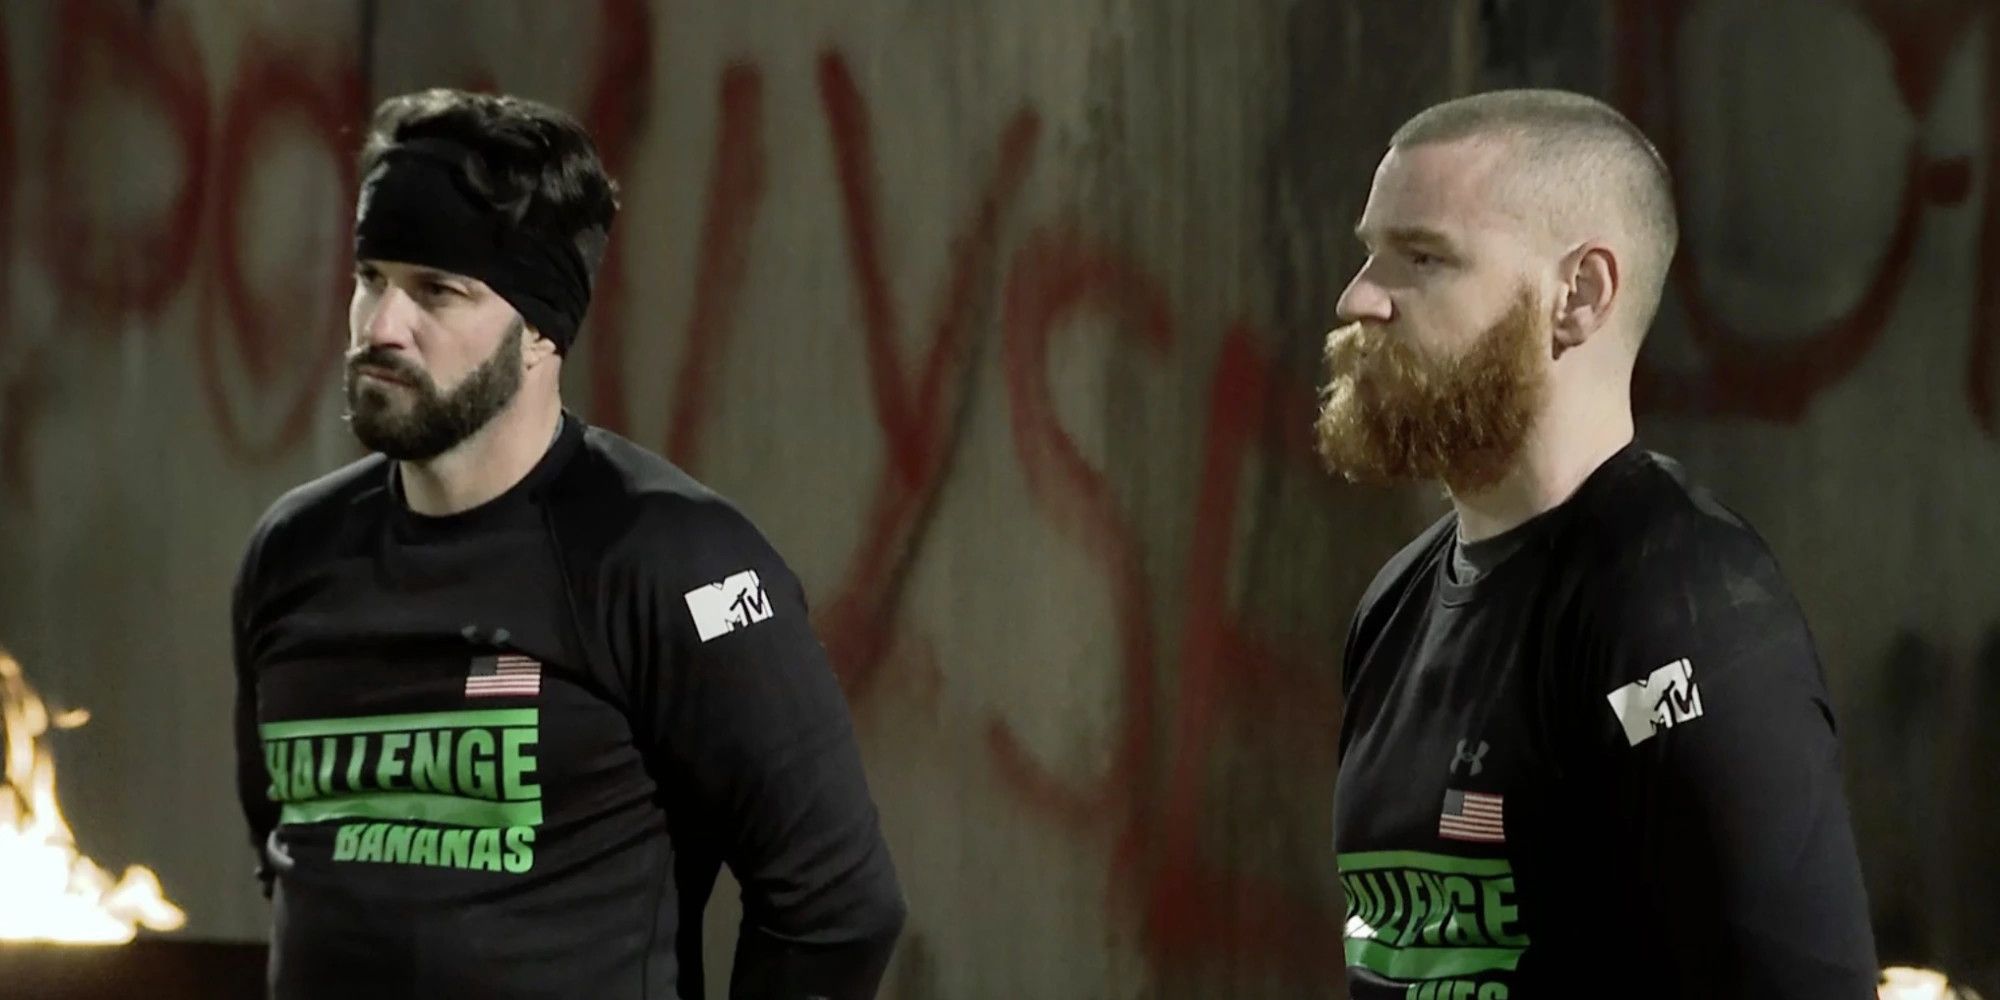 Bananas & Wes on The Challenge. They are standing beside each other and looking off camera, both wearing black long sleeve shirts with The Challenge logo written in green. They are in front of a wall with red lettering on it. 